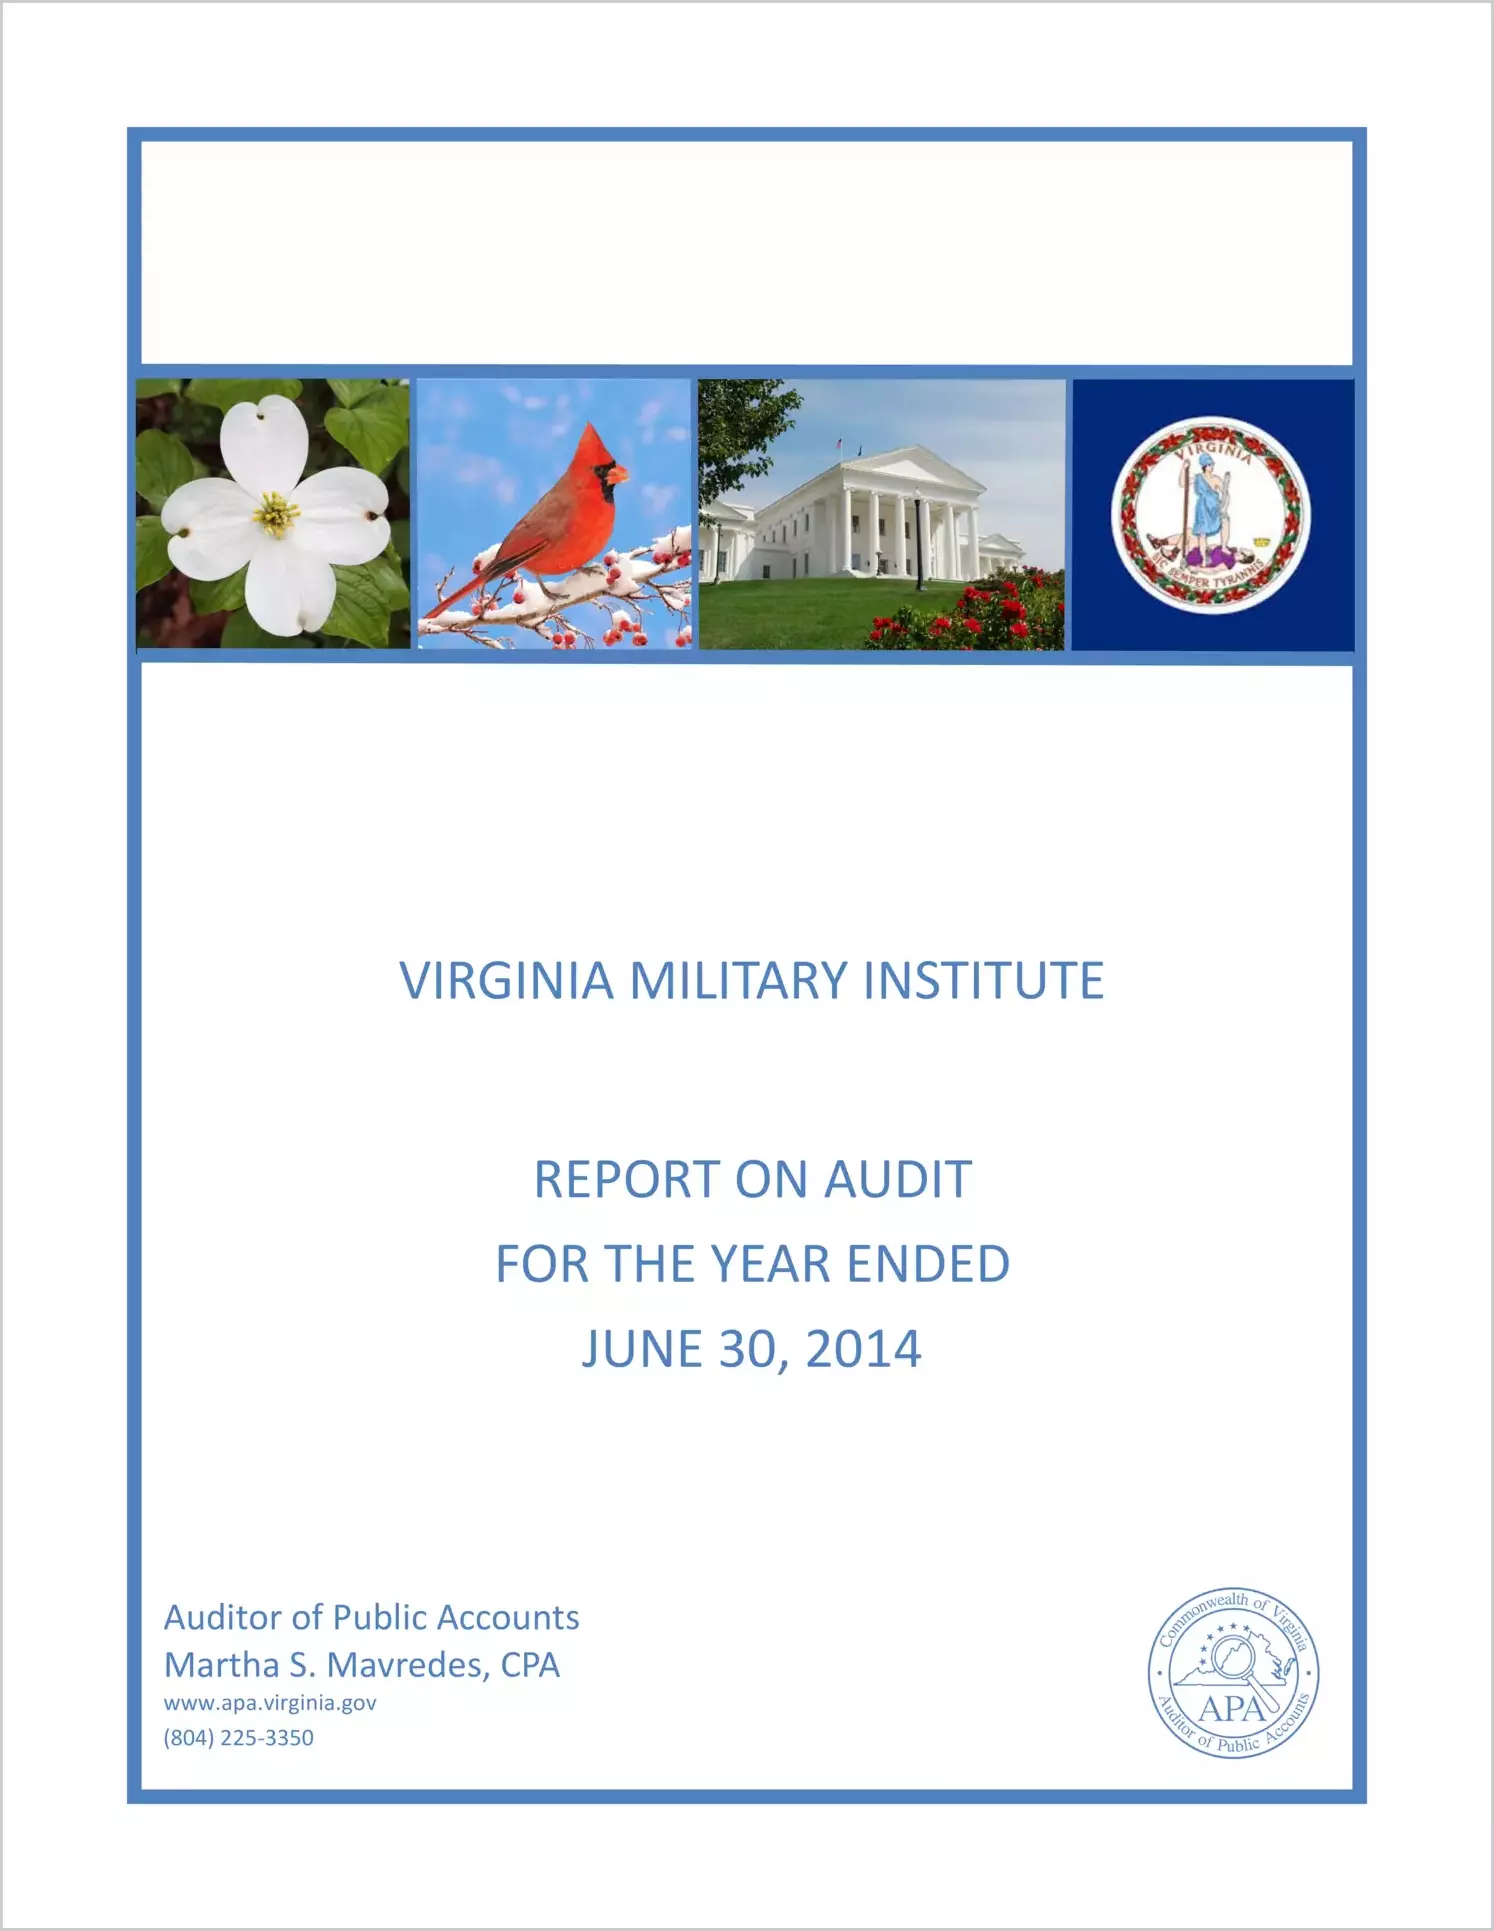 Virginia Military Institute for the year ended June 30, 2014